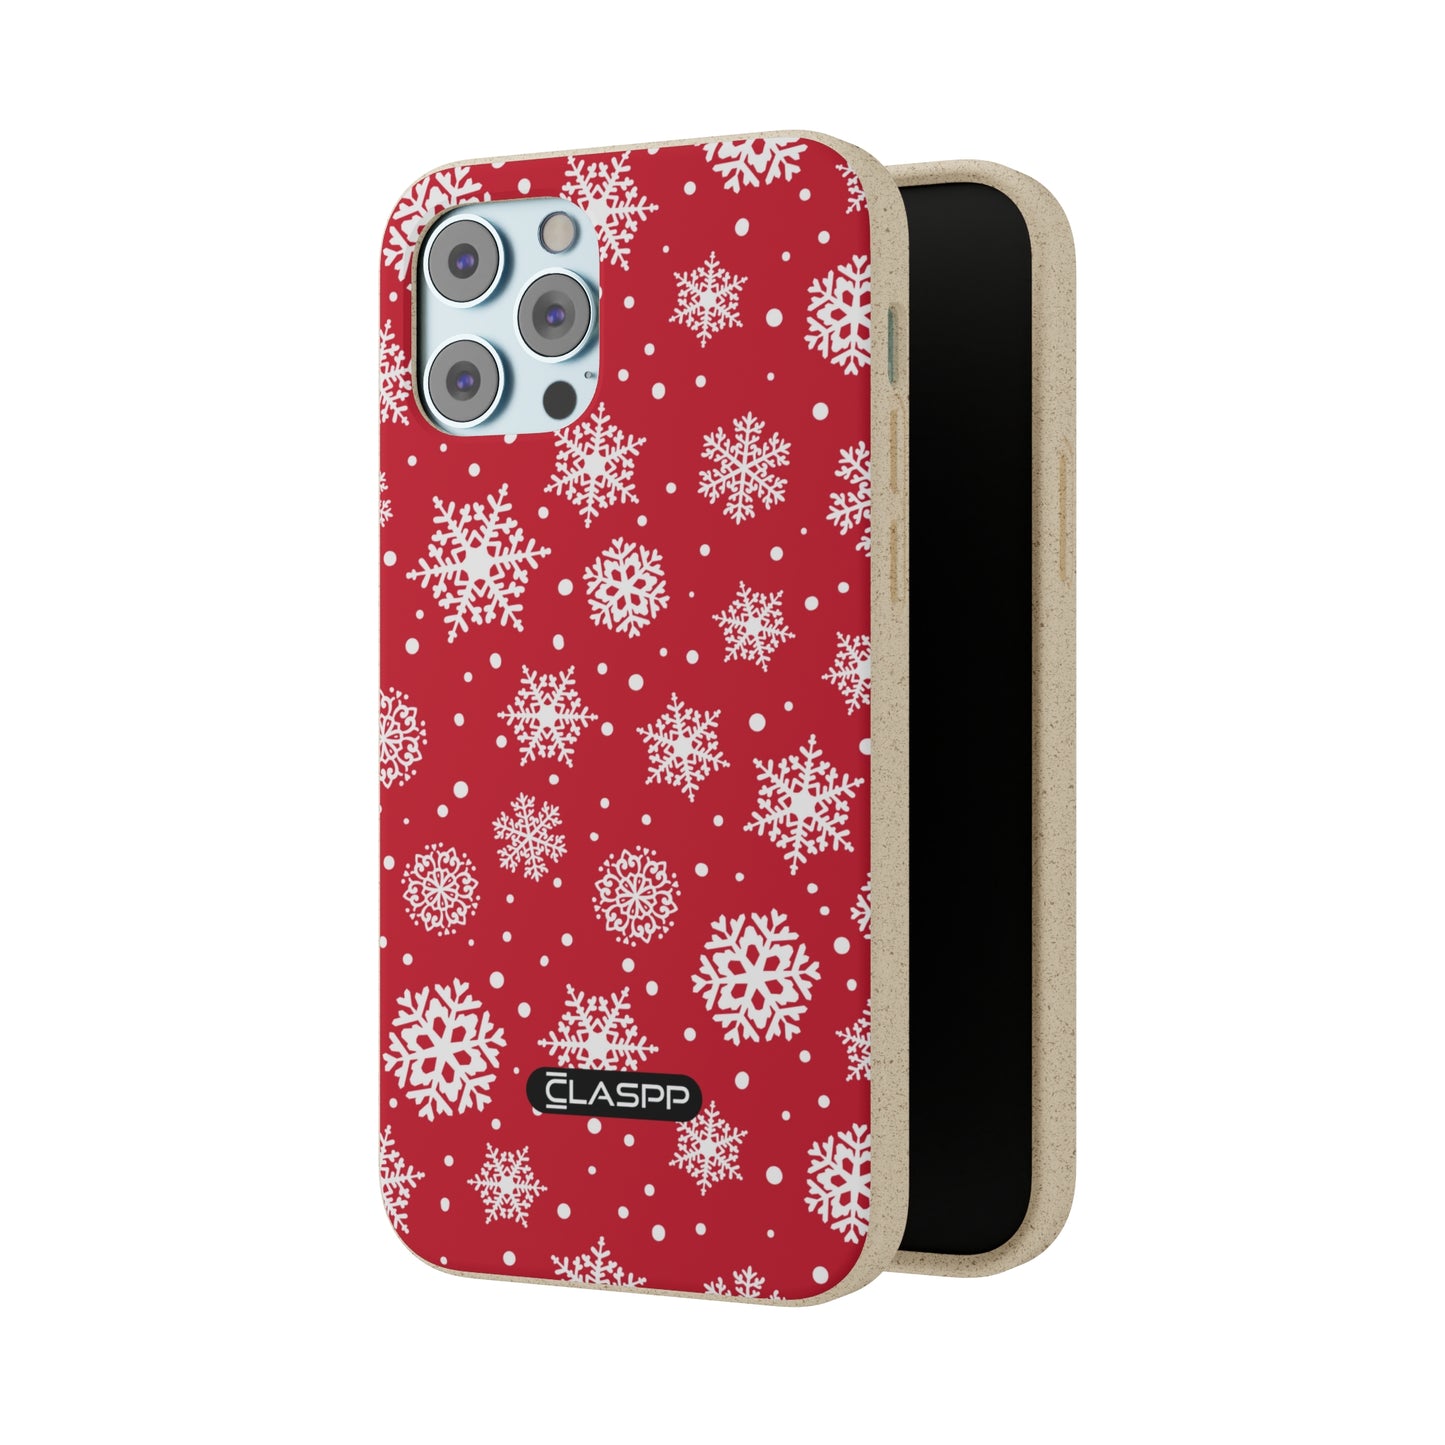 Snowflakes on Red | Christmas | Protective Biodegradable Case